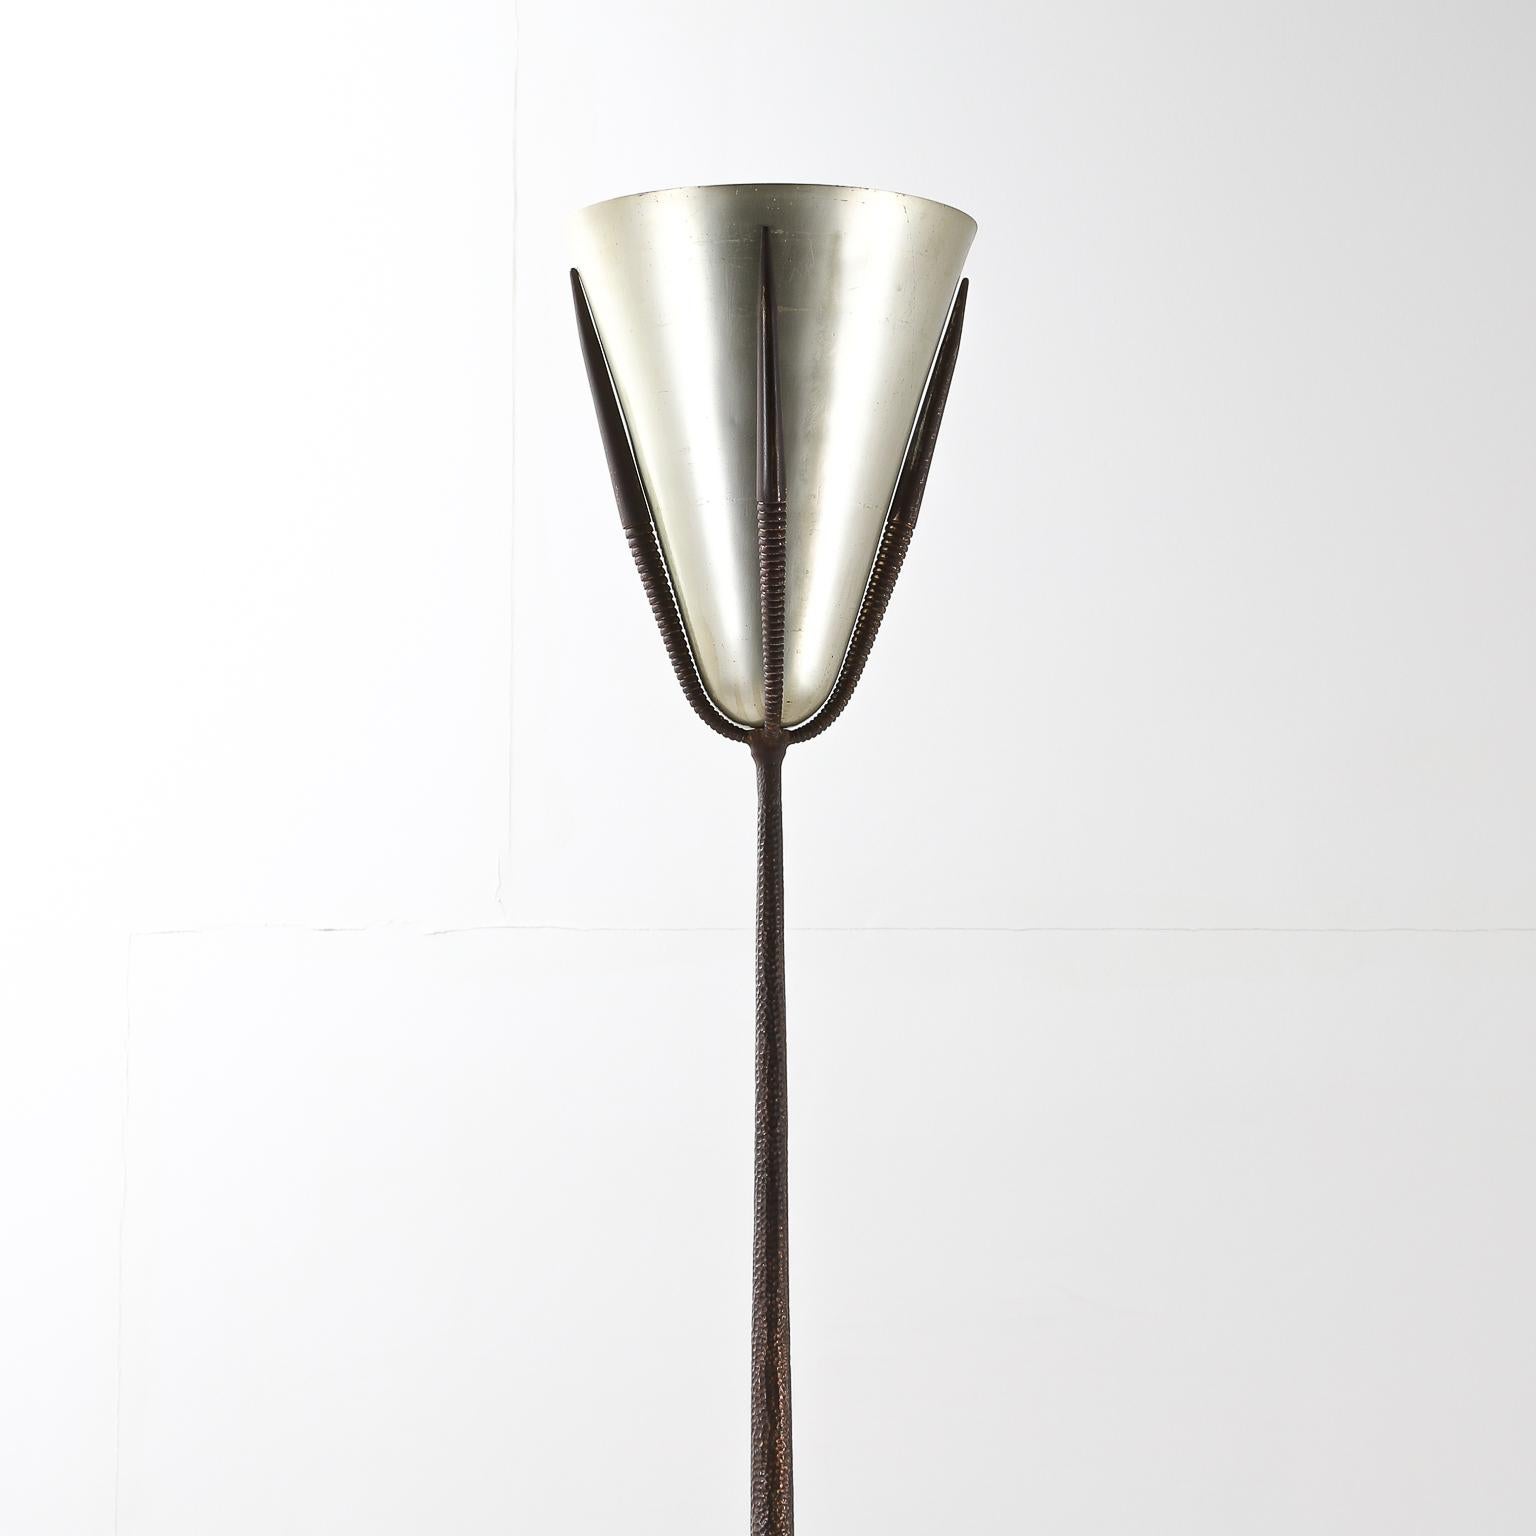 Italian 1970s Luminator floor lamp - bronze and aluminium fusion. Hand hammered details along the stem of the lamp running into 4 ribbed supports holding the aluminium shade.